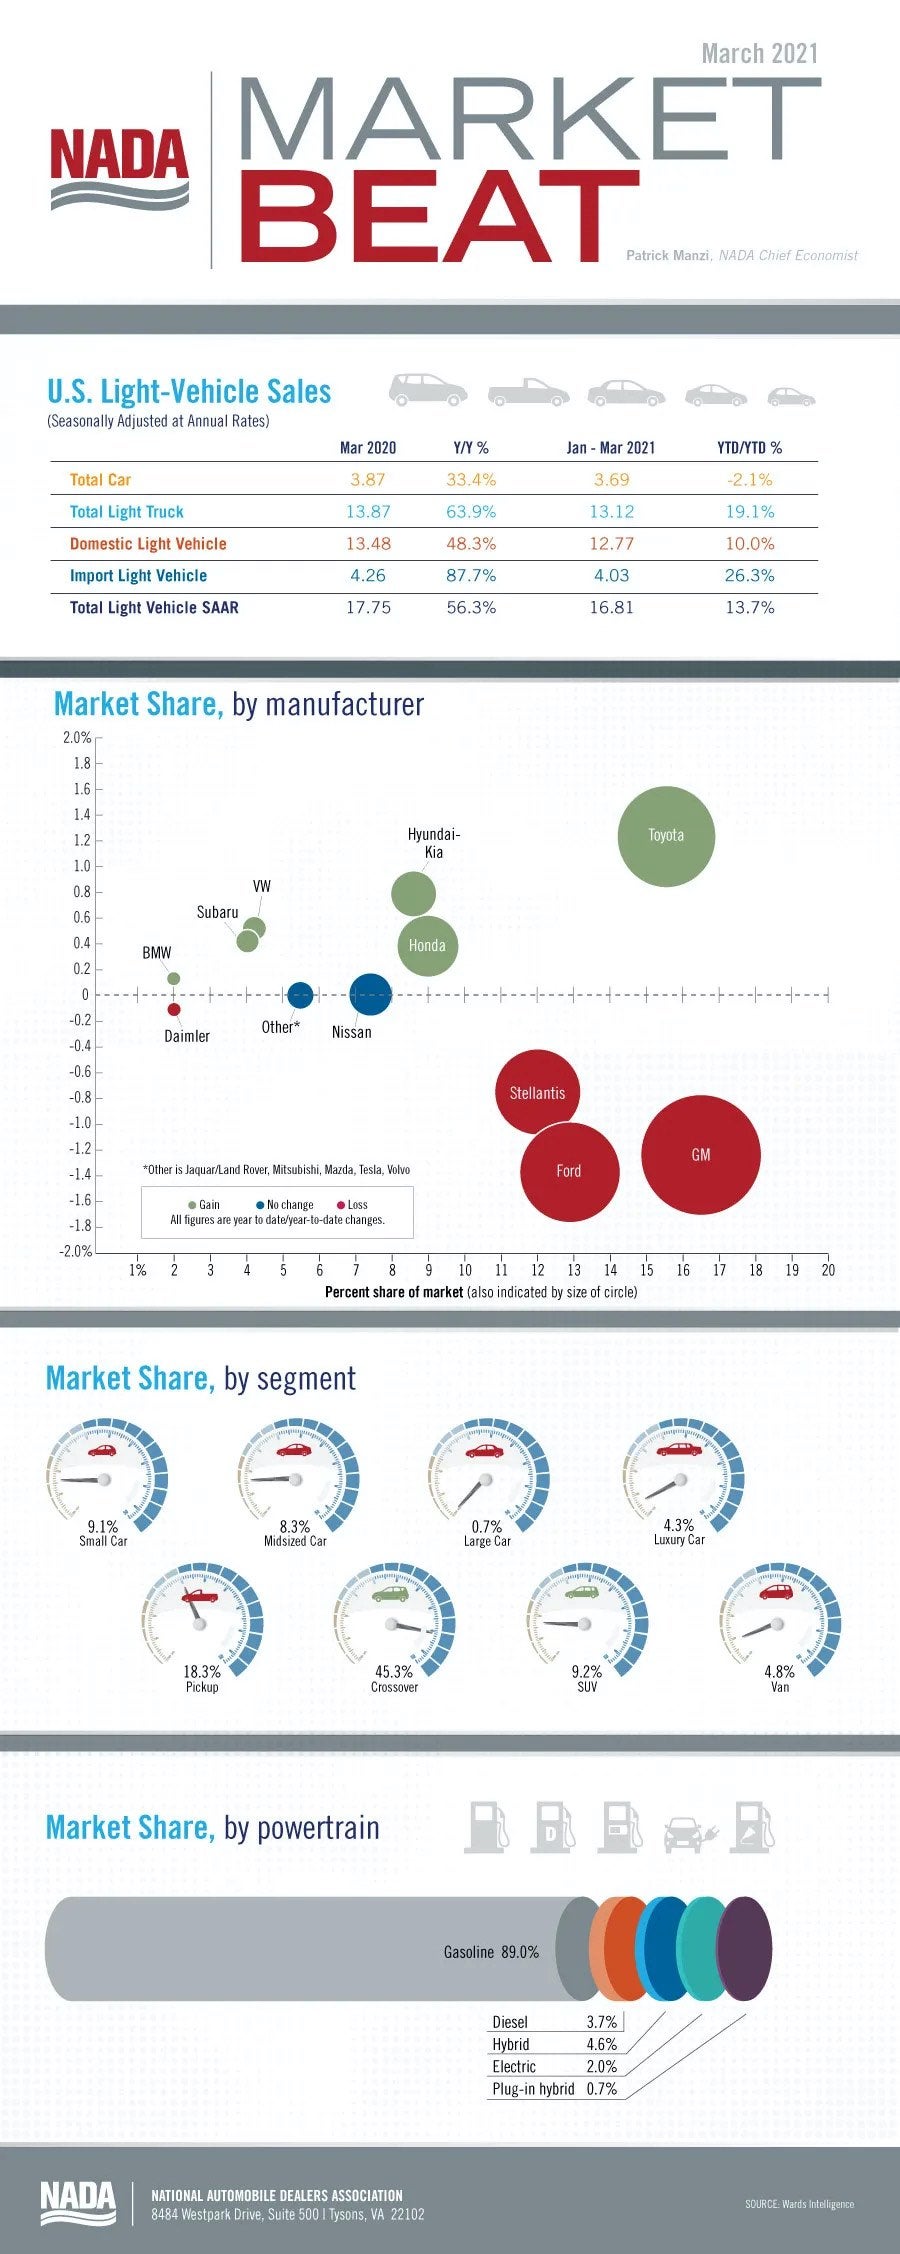 March 2021 Market Beat Infographic